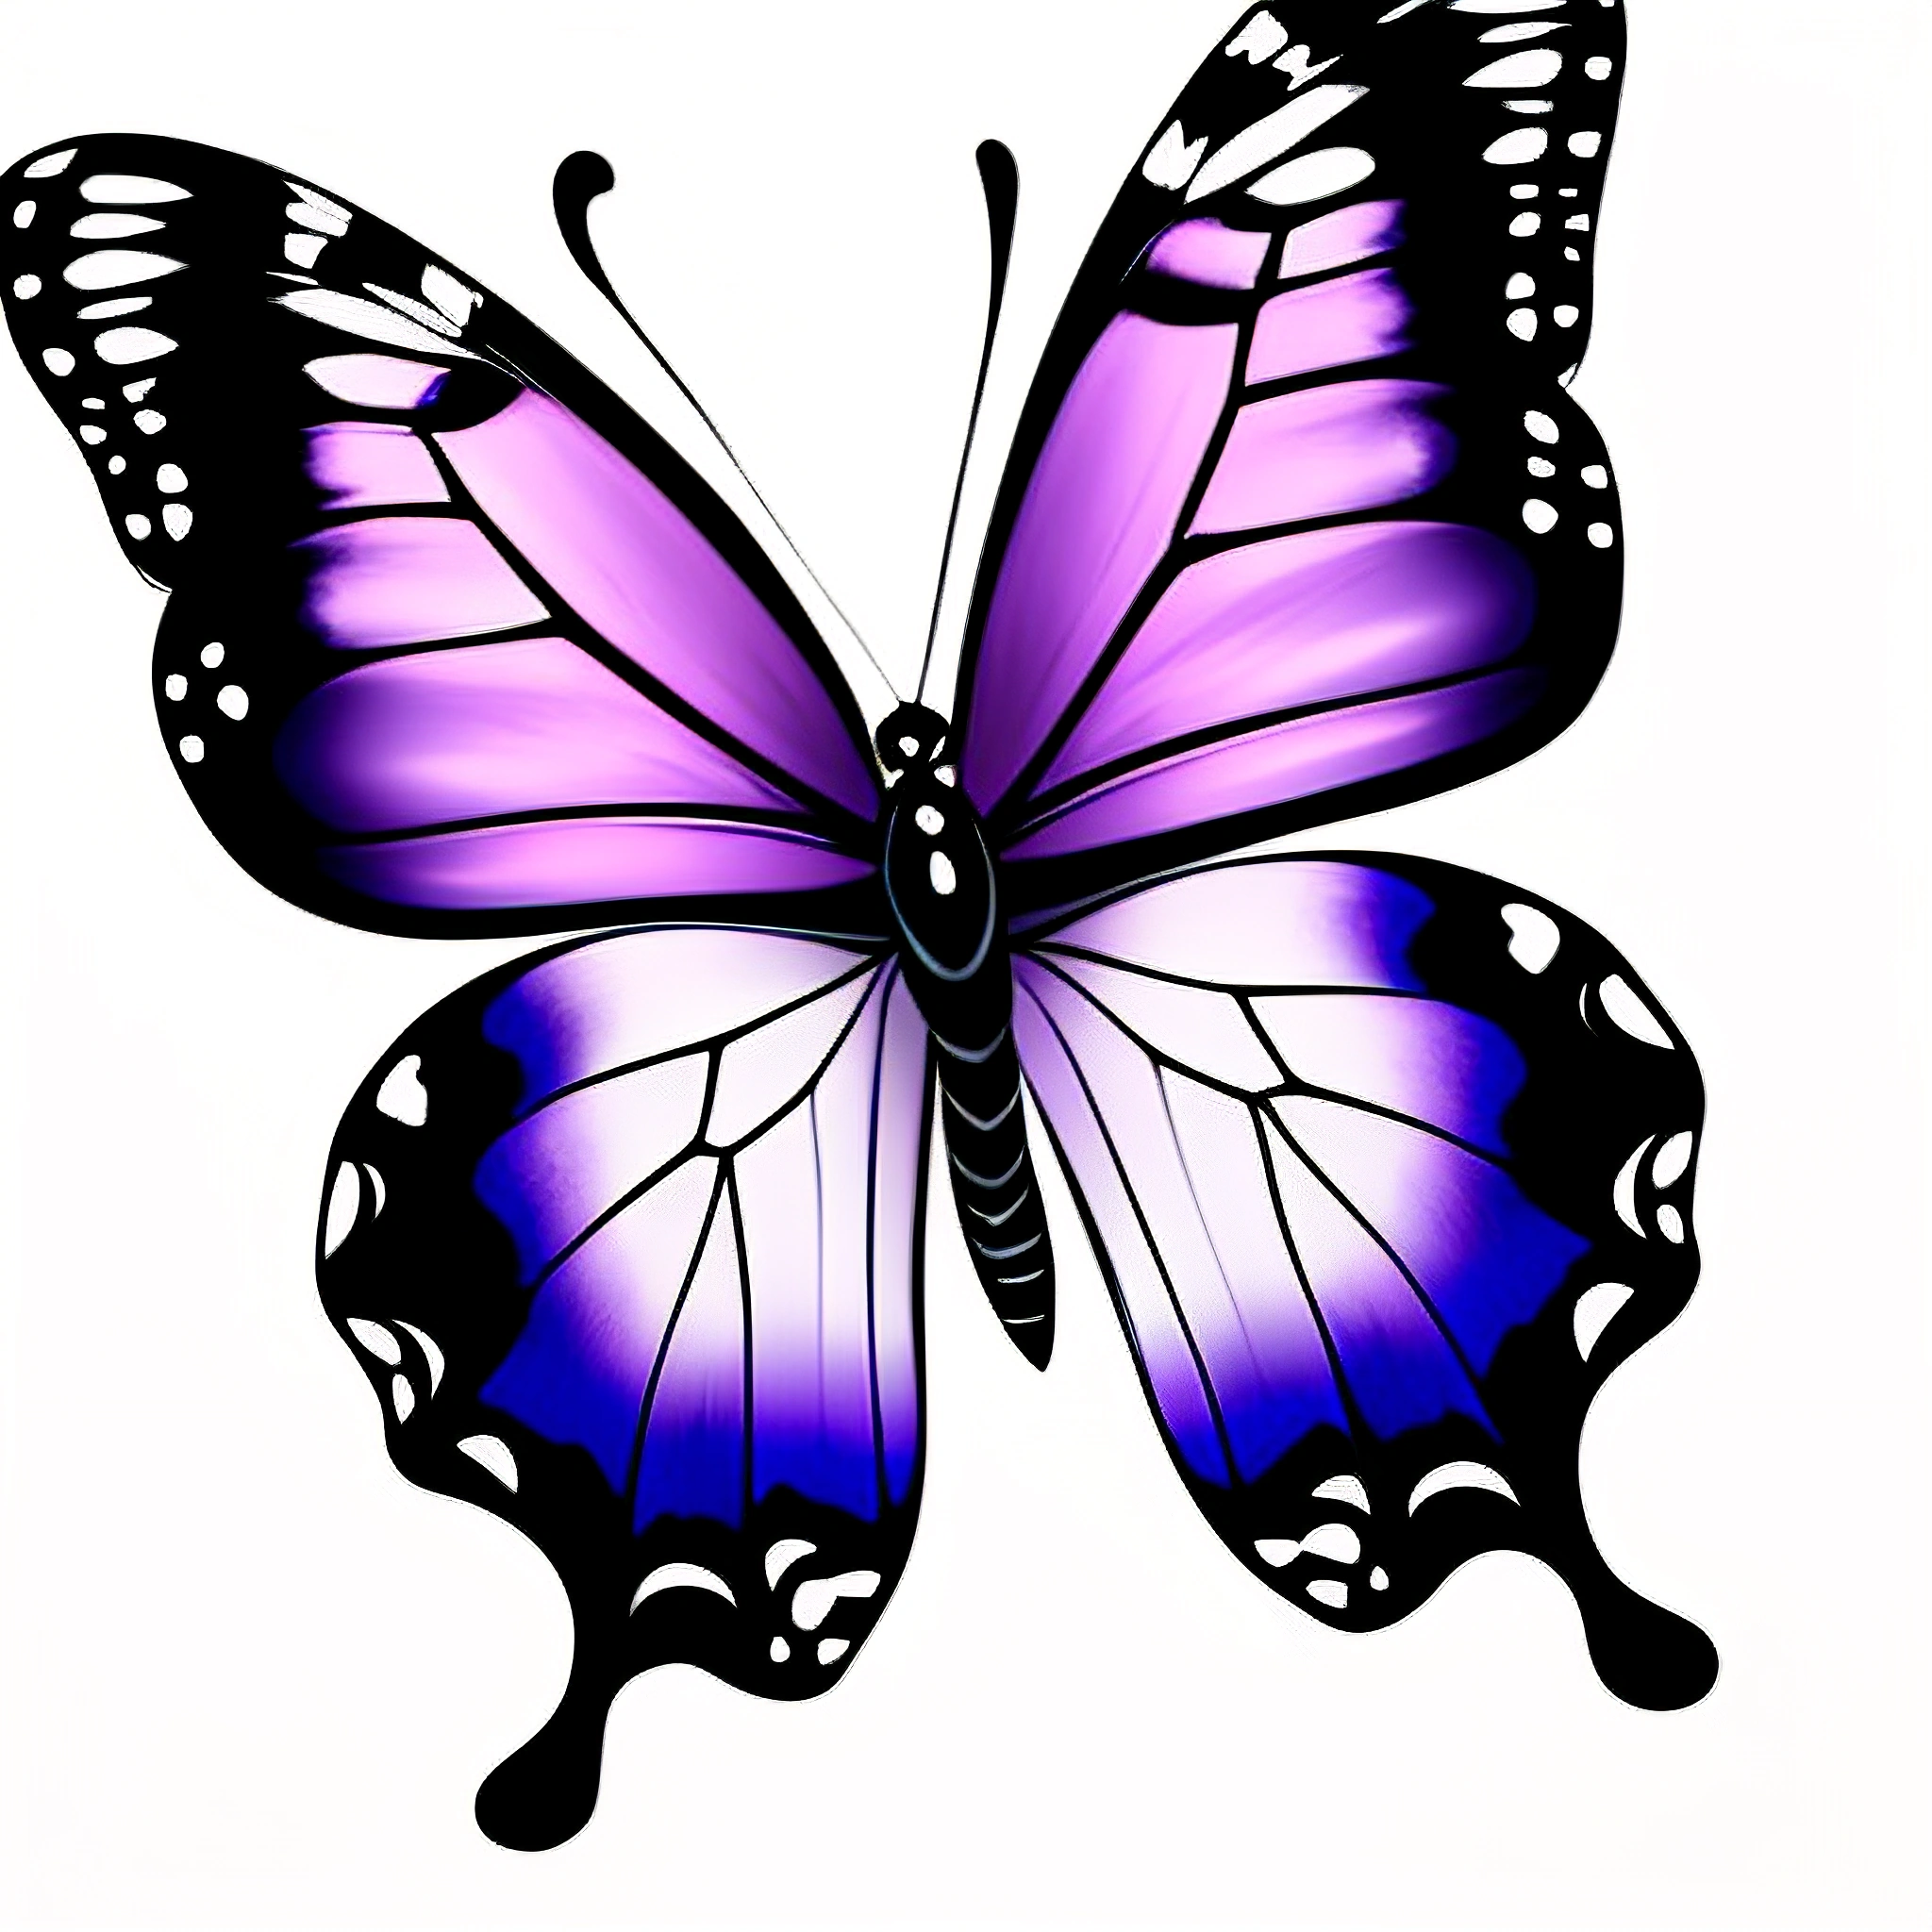 purple butterfly with black wings on white background